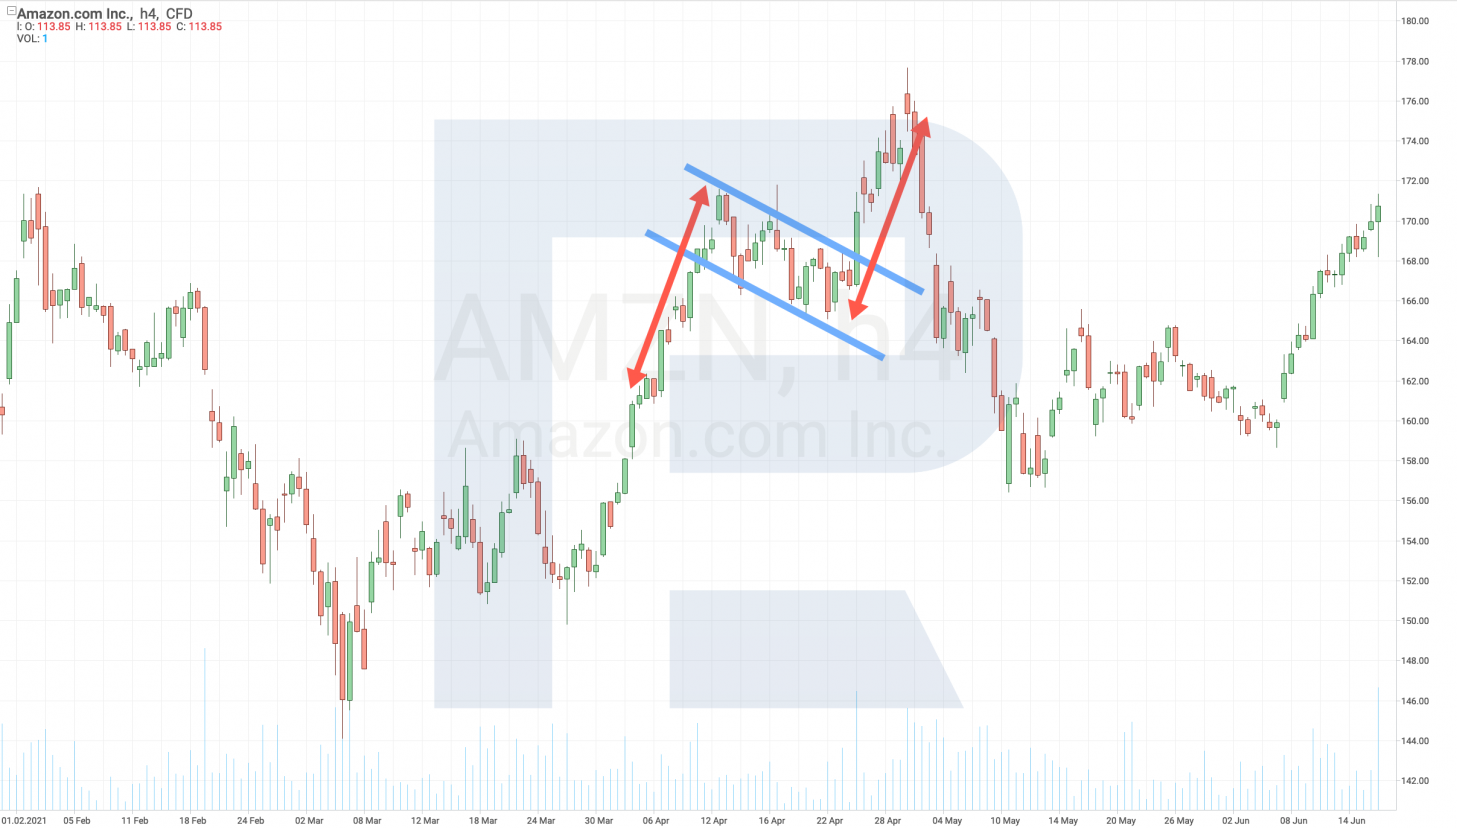 Triangle pattern on a stock chart